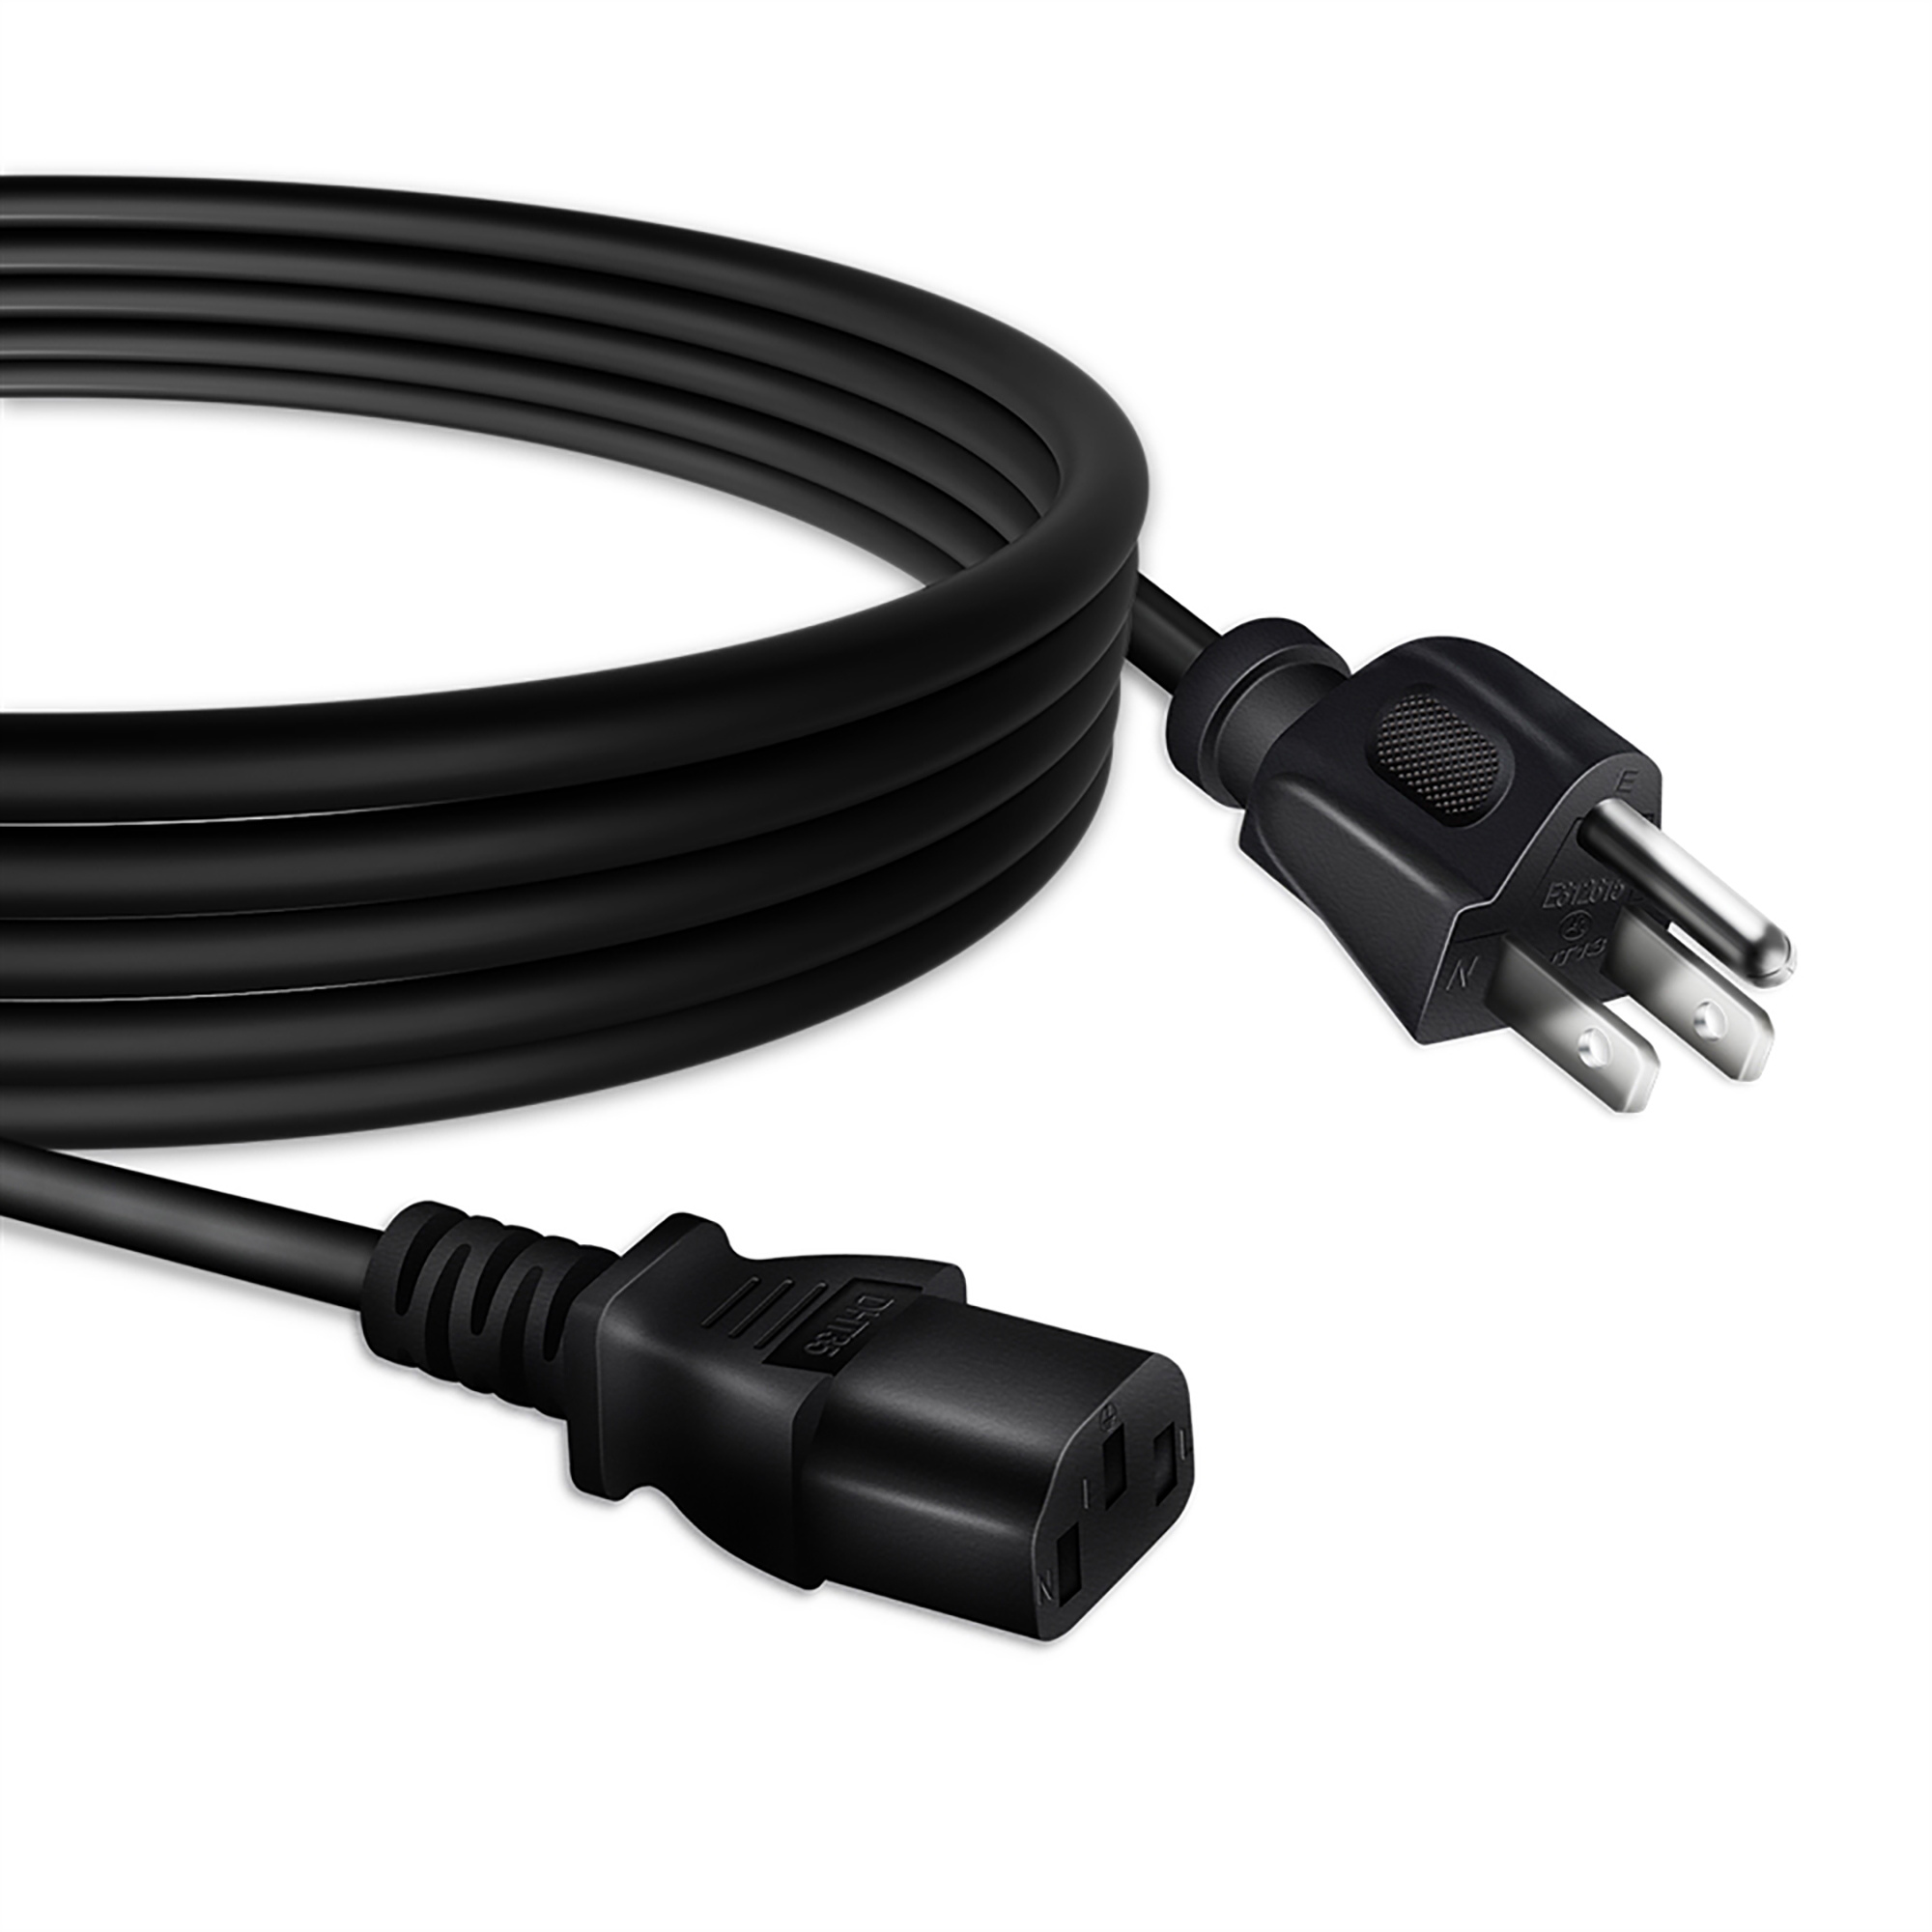 PKPOWER 6ft AC Power Cable Charger Cord for JBL EON615 15" Powered DJ PA Loud Speakers" - image 1 of 5